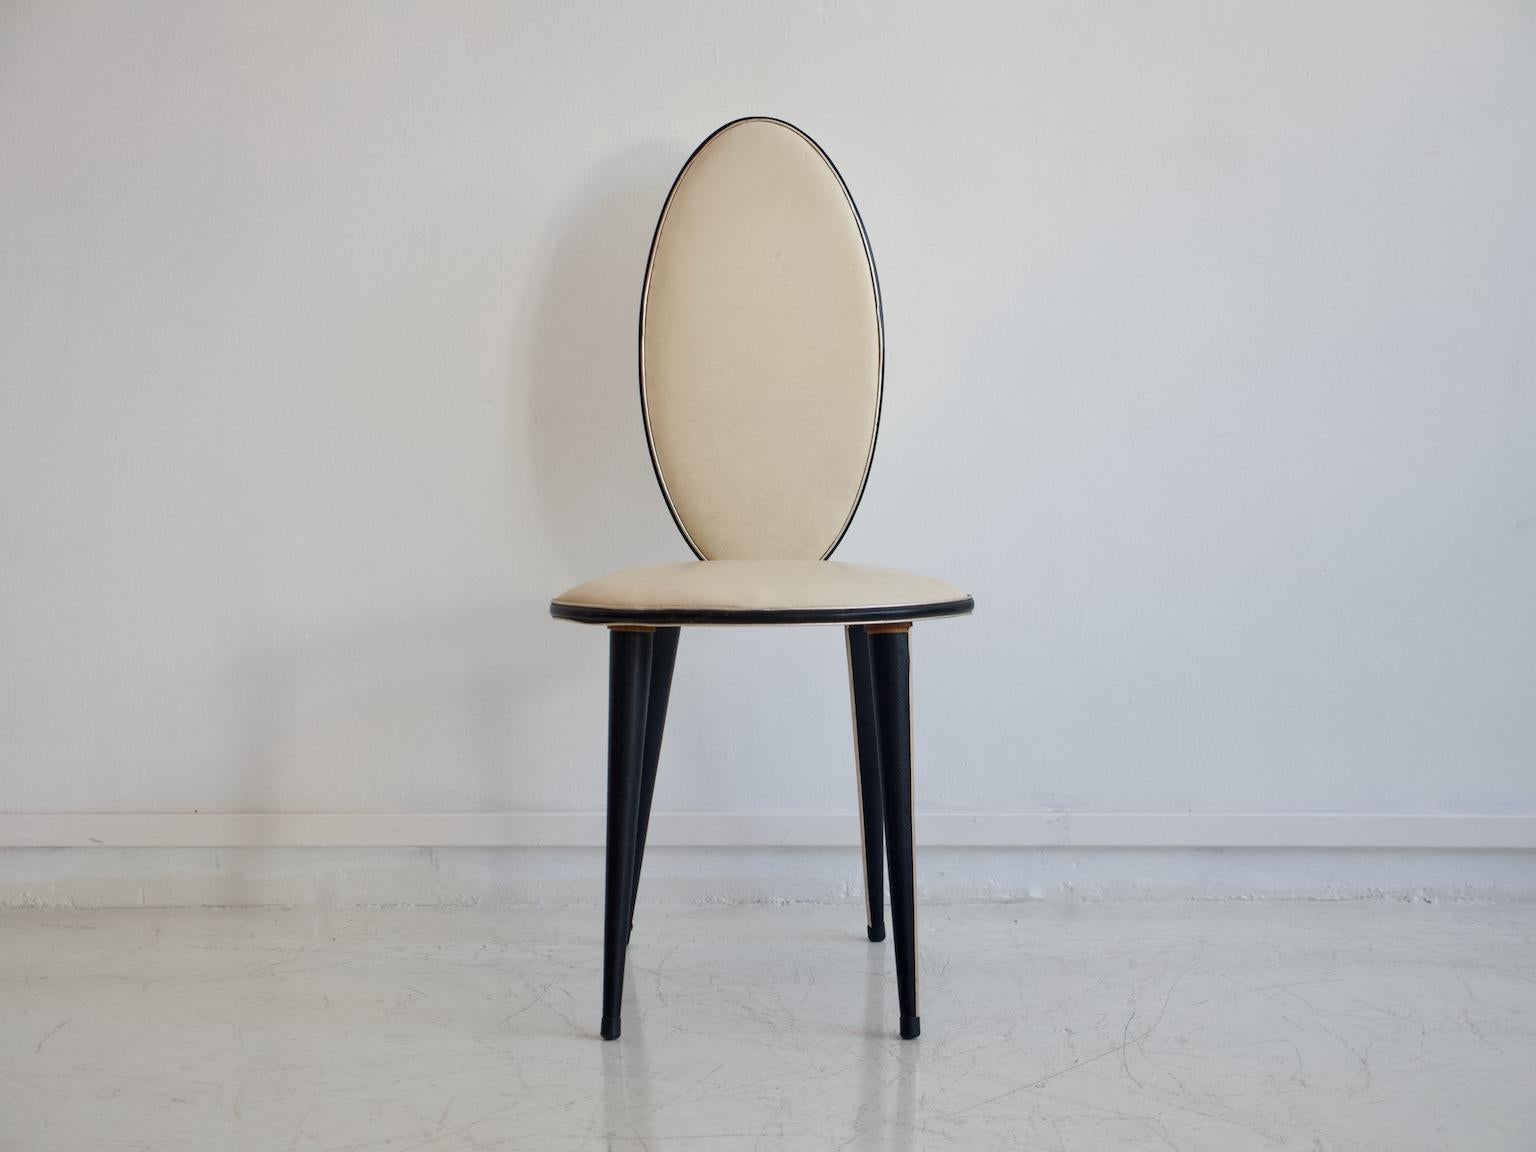 Chair from the 1950s, Italian design by Umberto Mascagni. Conical wooden legs covered with black vinyl and with inlaid gold metal trim. Seat and back covered in cream white vinyl with black edging. Traces of wear commensurate with age, some cracks